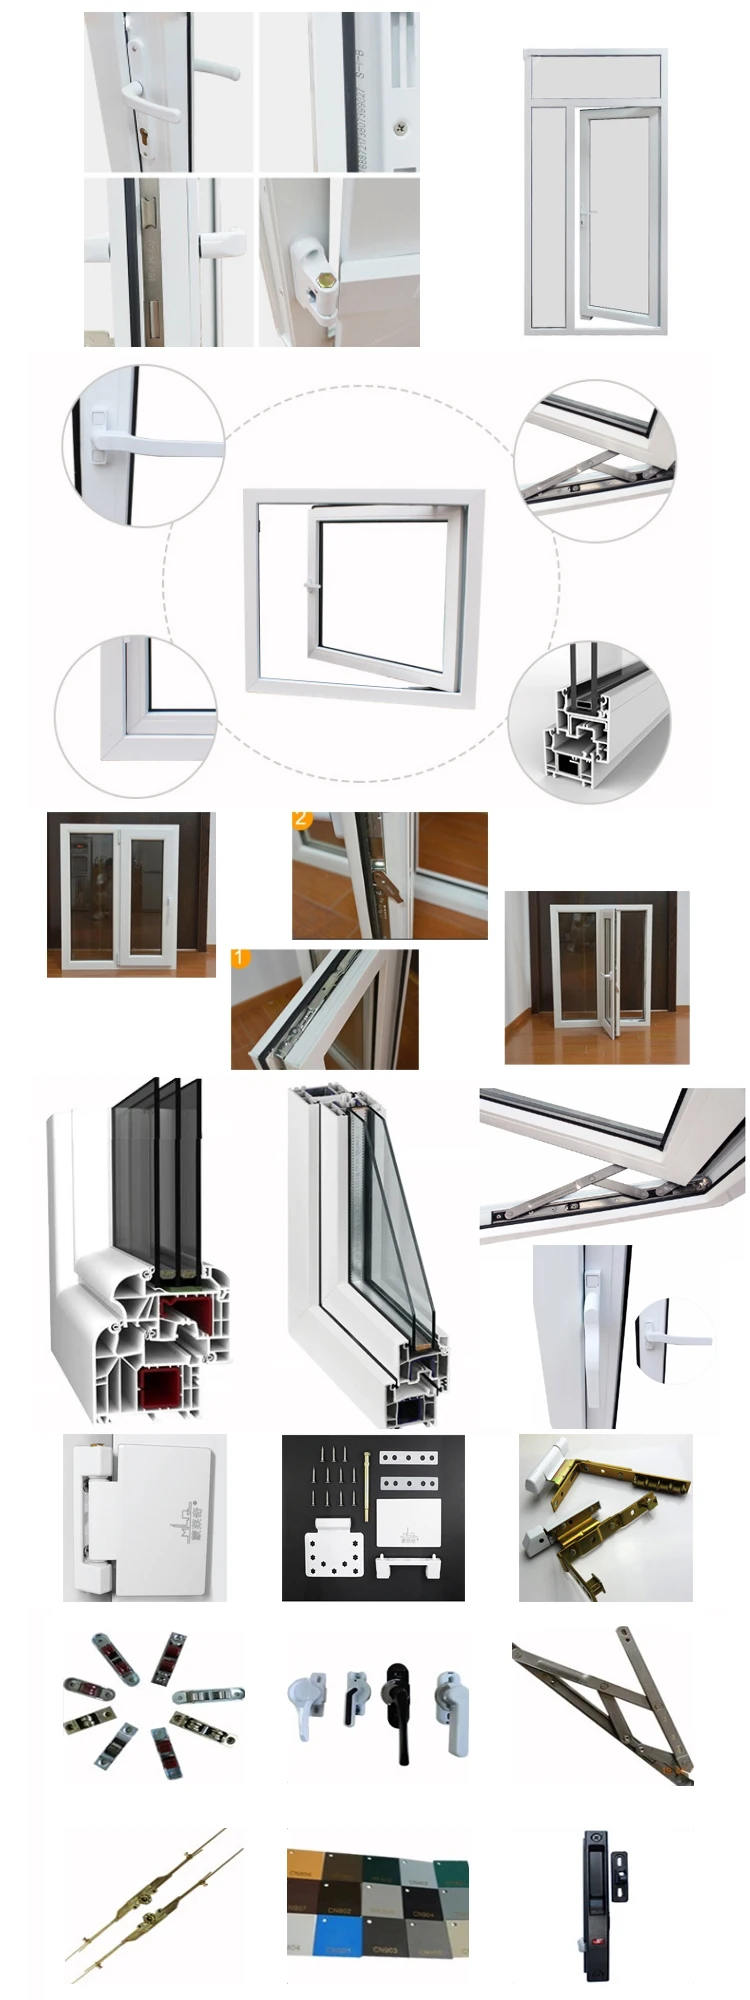 Factory Directly Supply frame door fog glass exterior pvc price with high quality